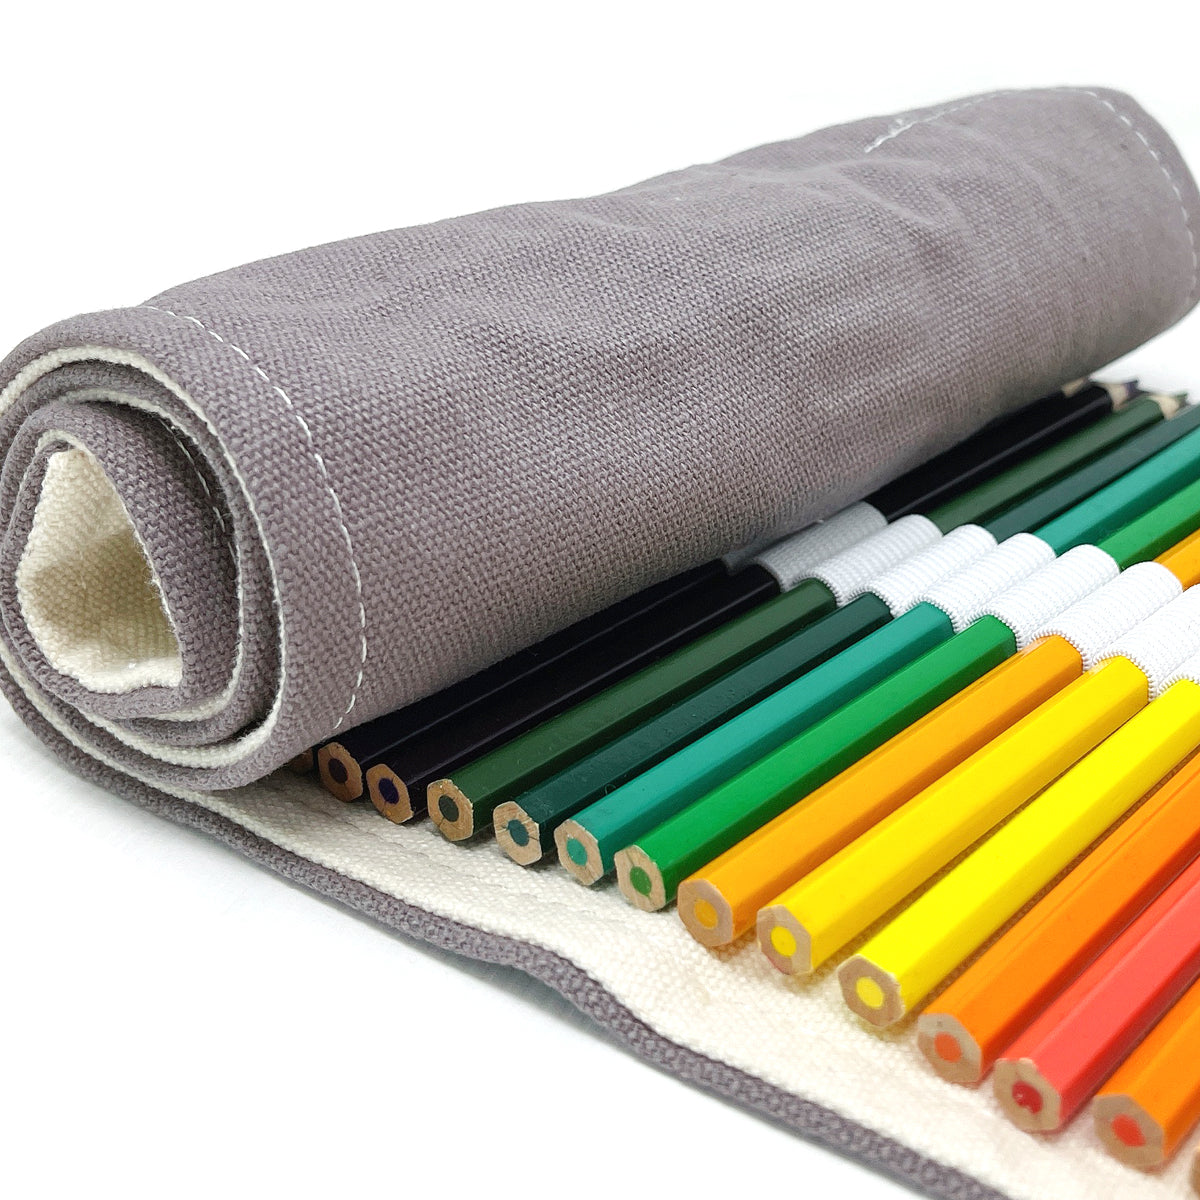 Linen like pencil roll up case for sublimation